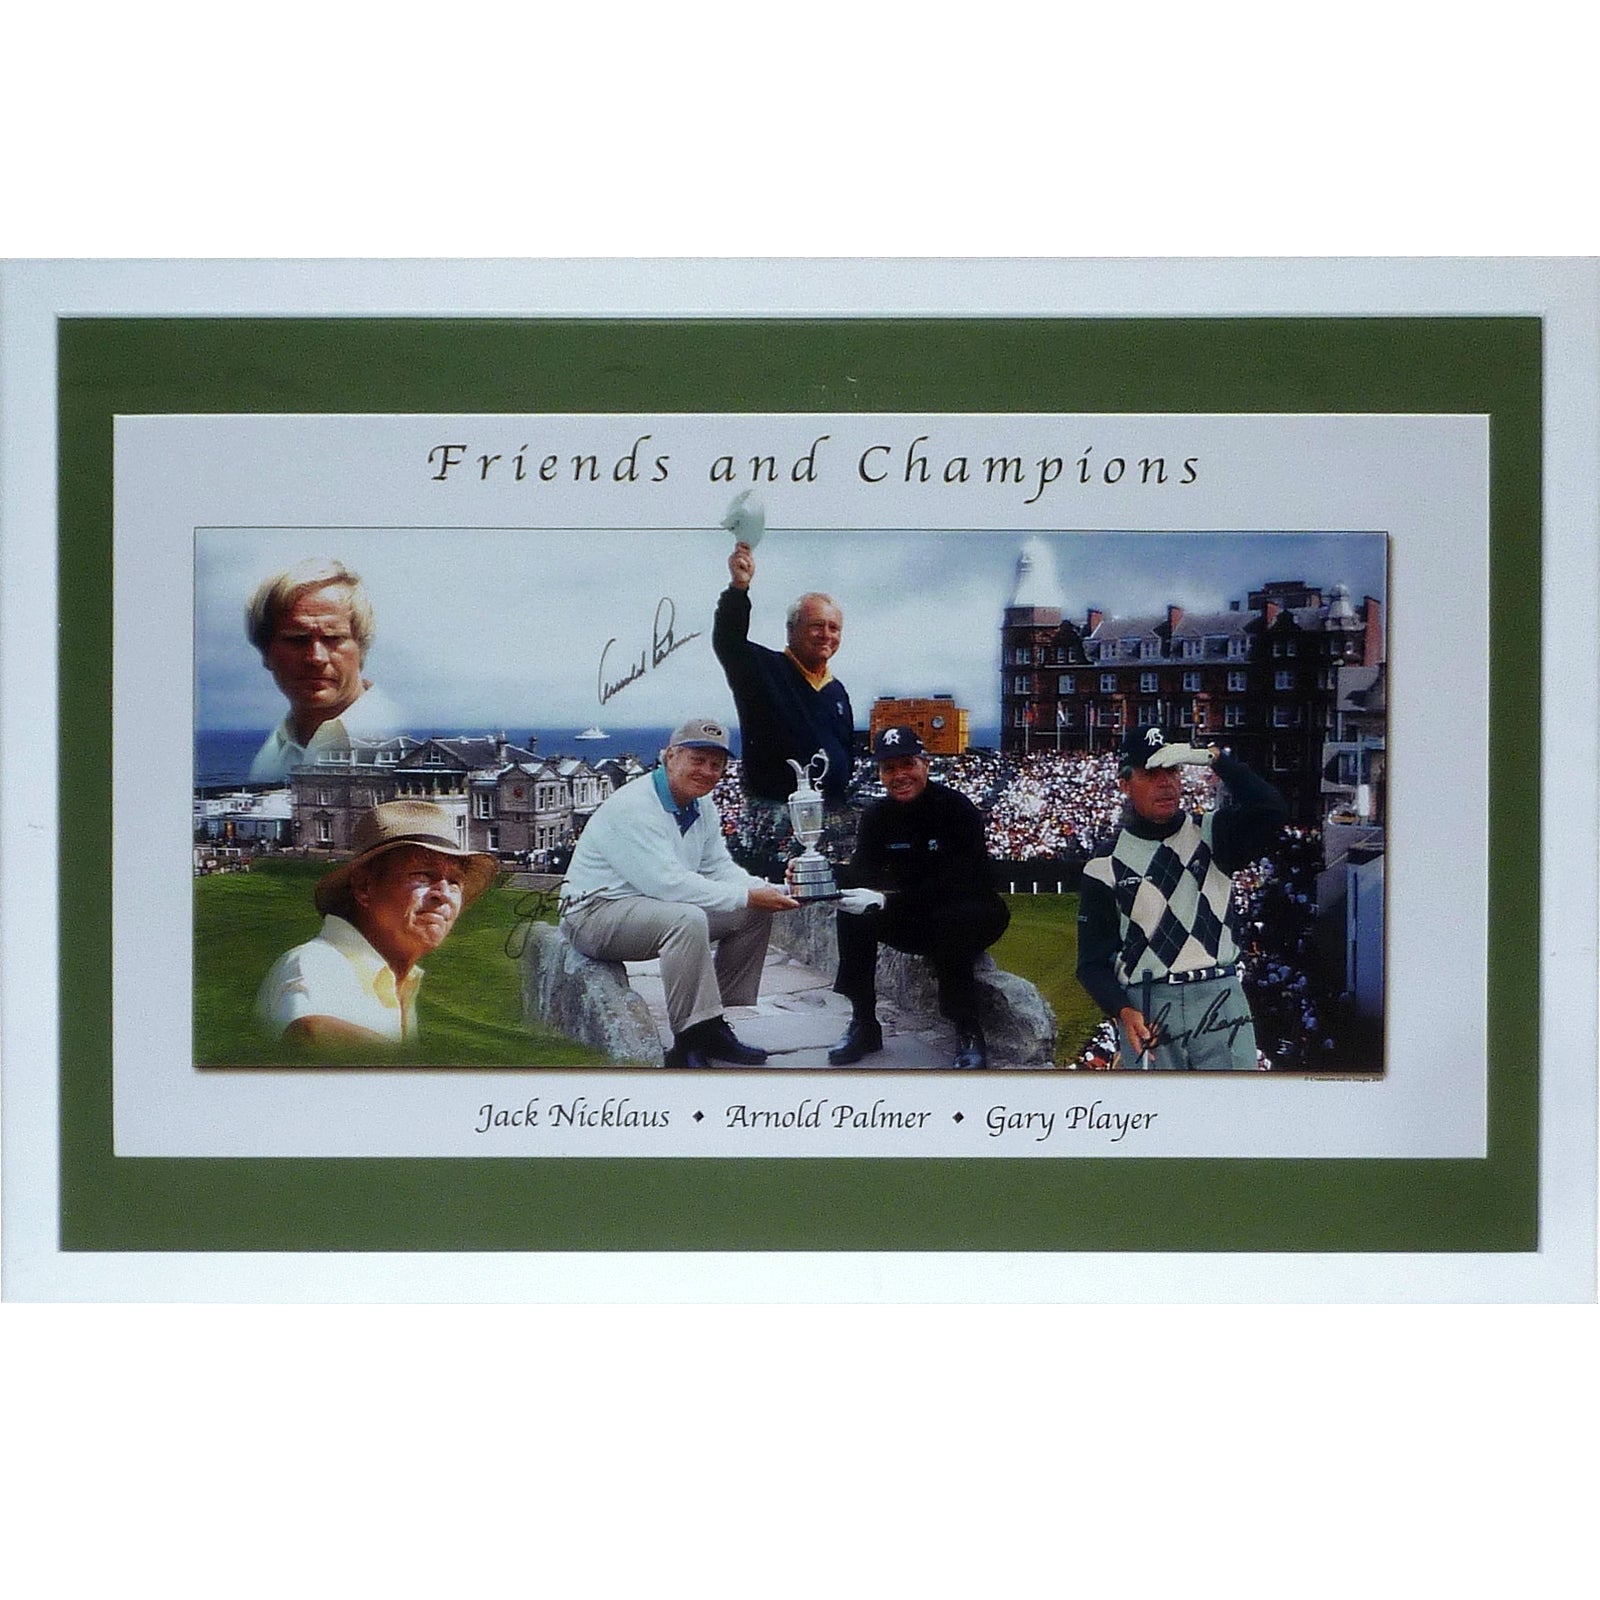 Jack Nicklaus, Arnold Palmer And Gary Player Autographed Friends And Champions Deluxe Framed Golf Poster - JSA